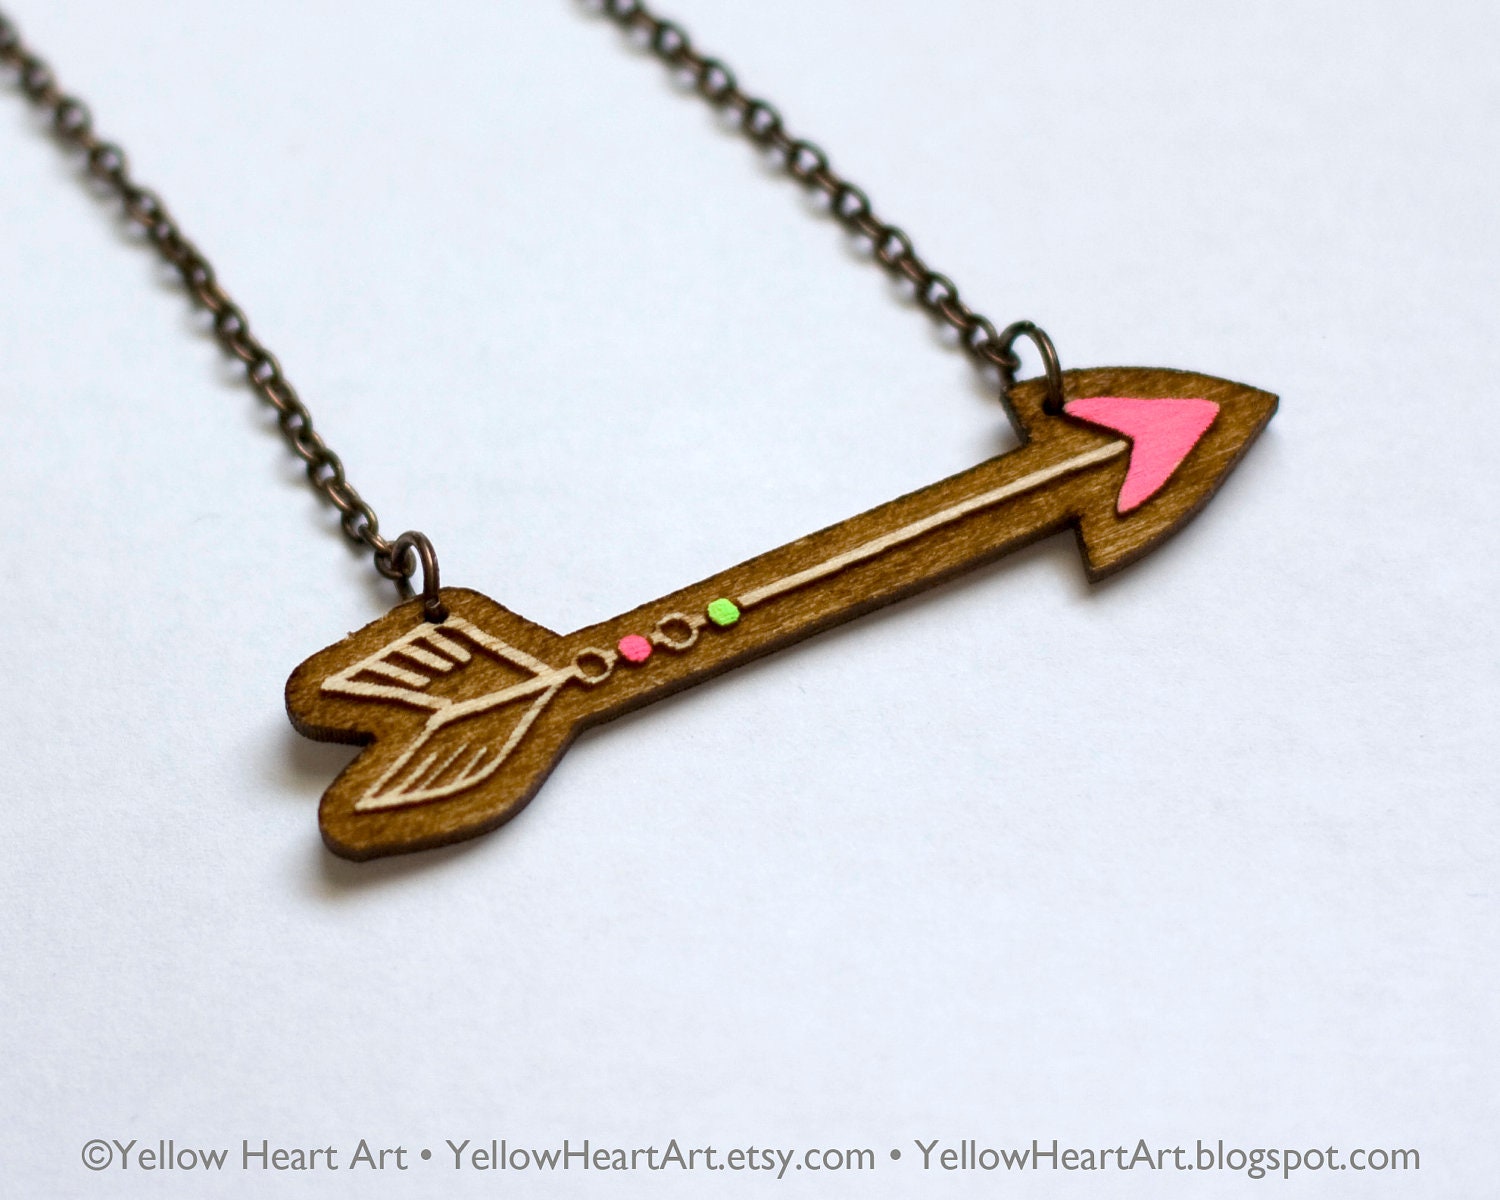 Neon Pink and Neon Green Arrow Wood Necklace Original Artwork by Yellow Heart Art